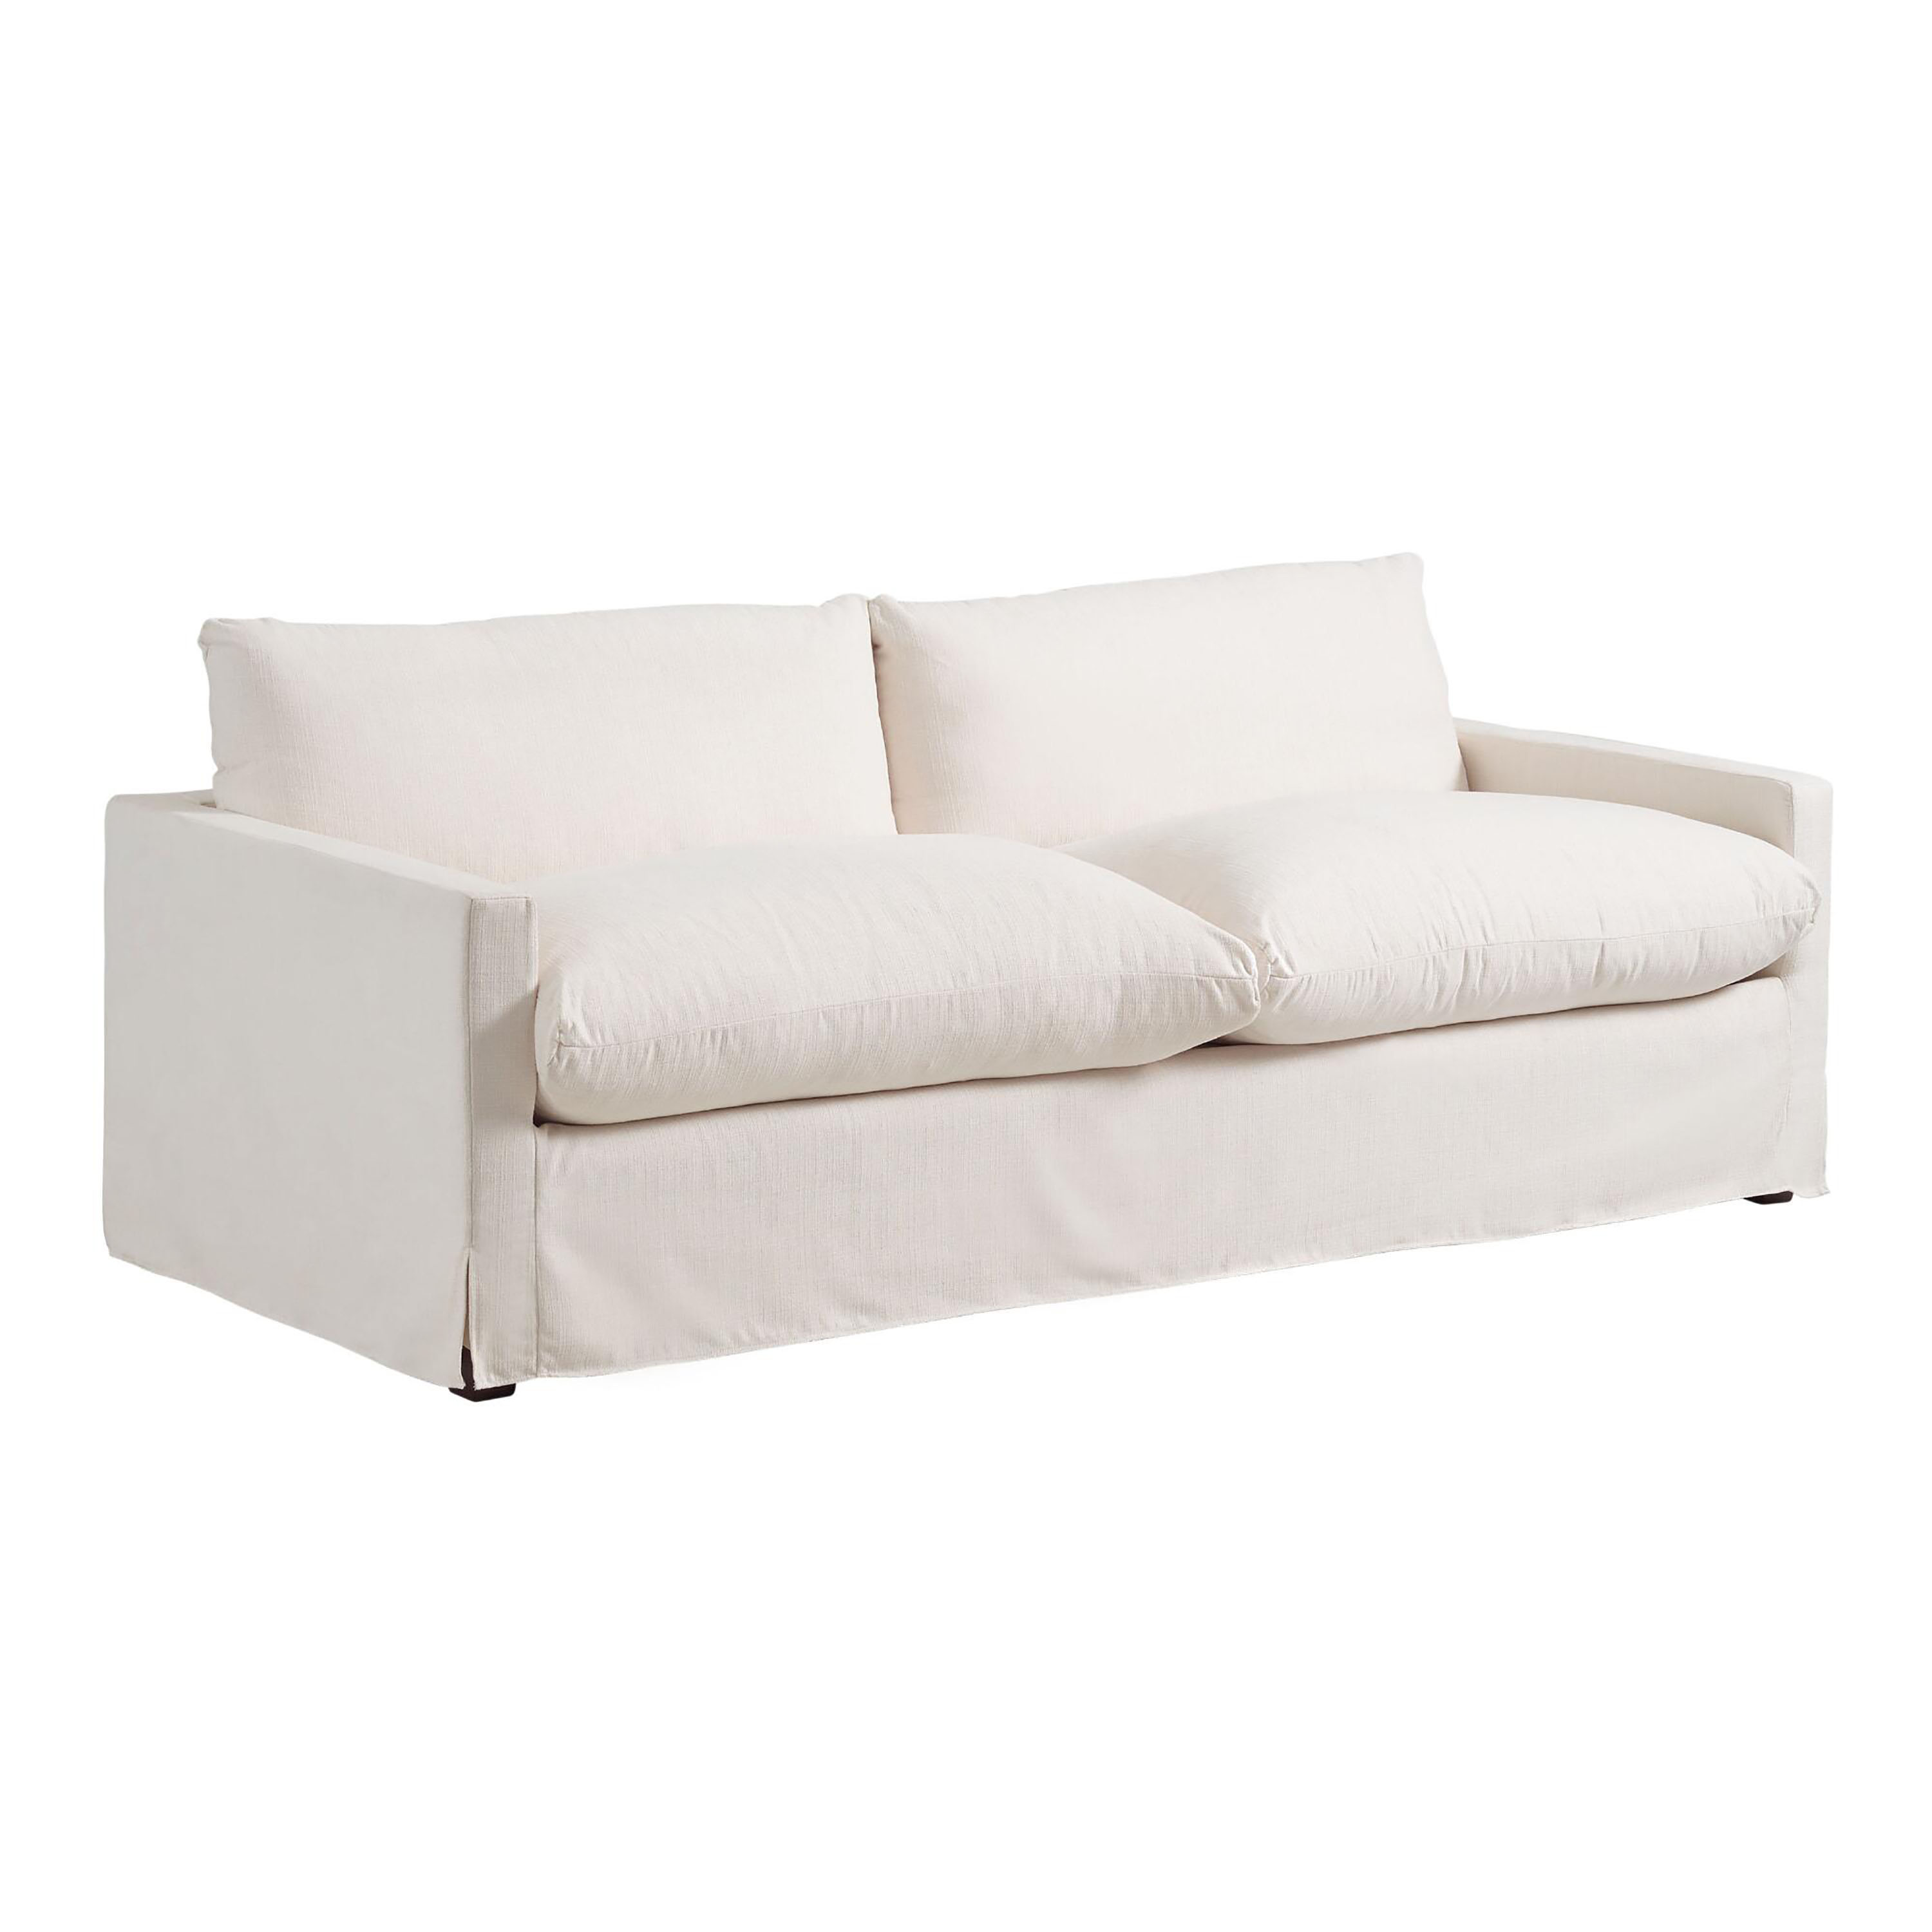 Replacement Feather Sofa Cushions